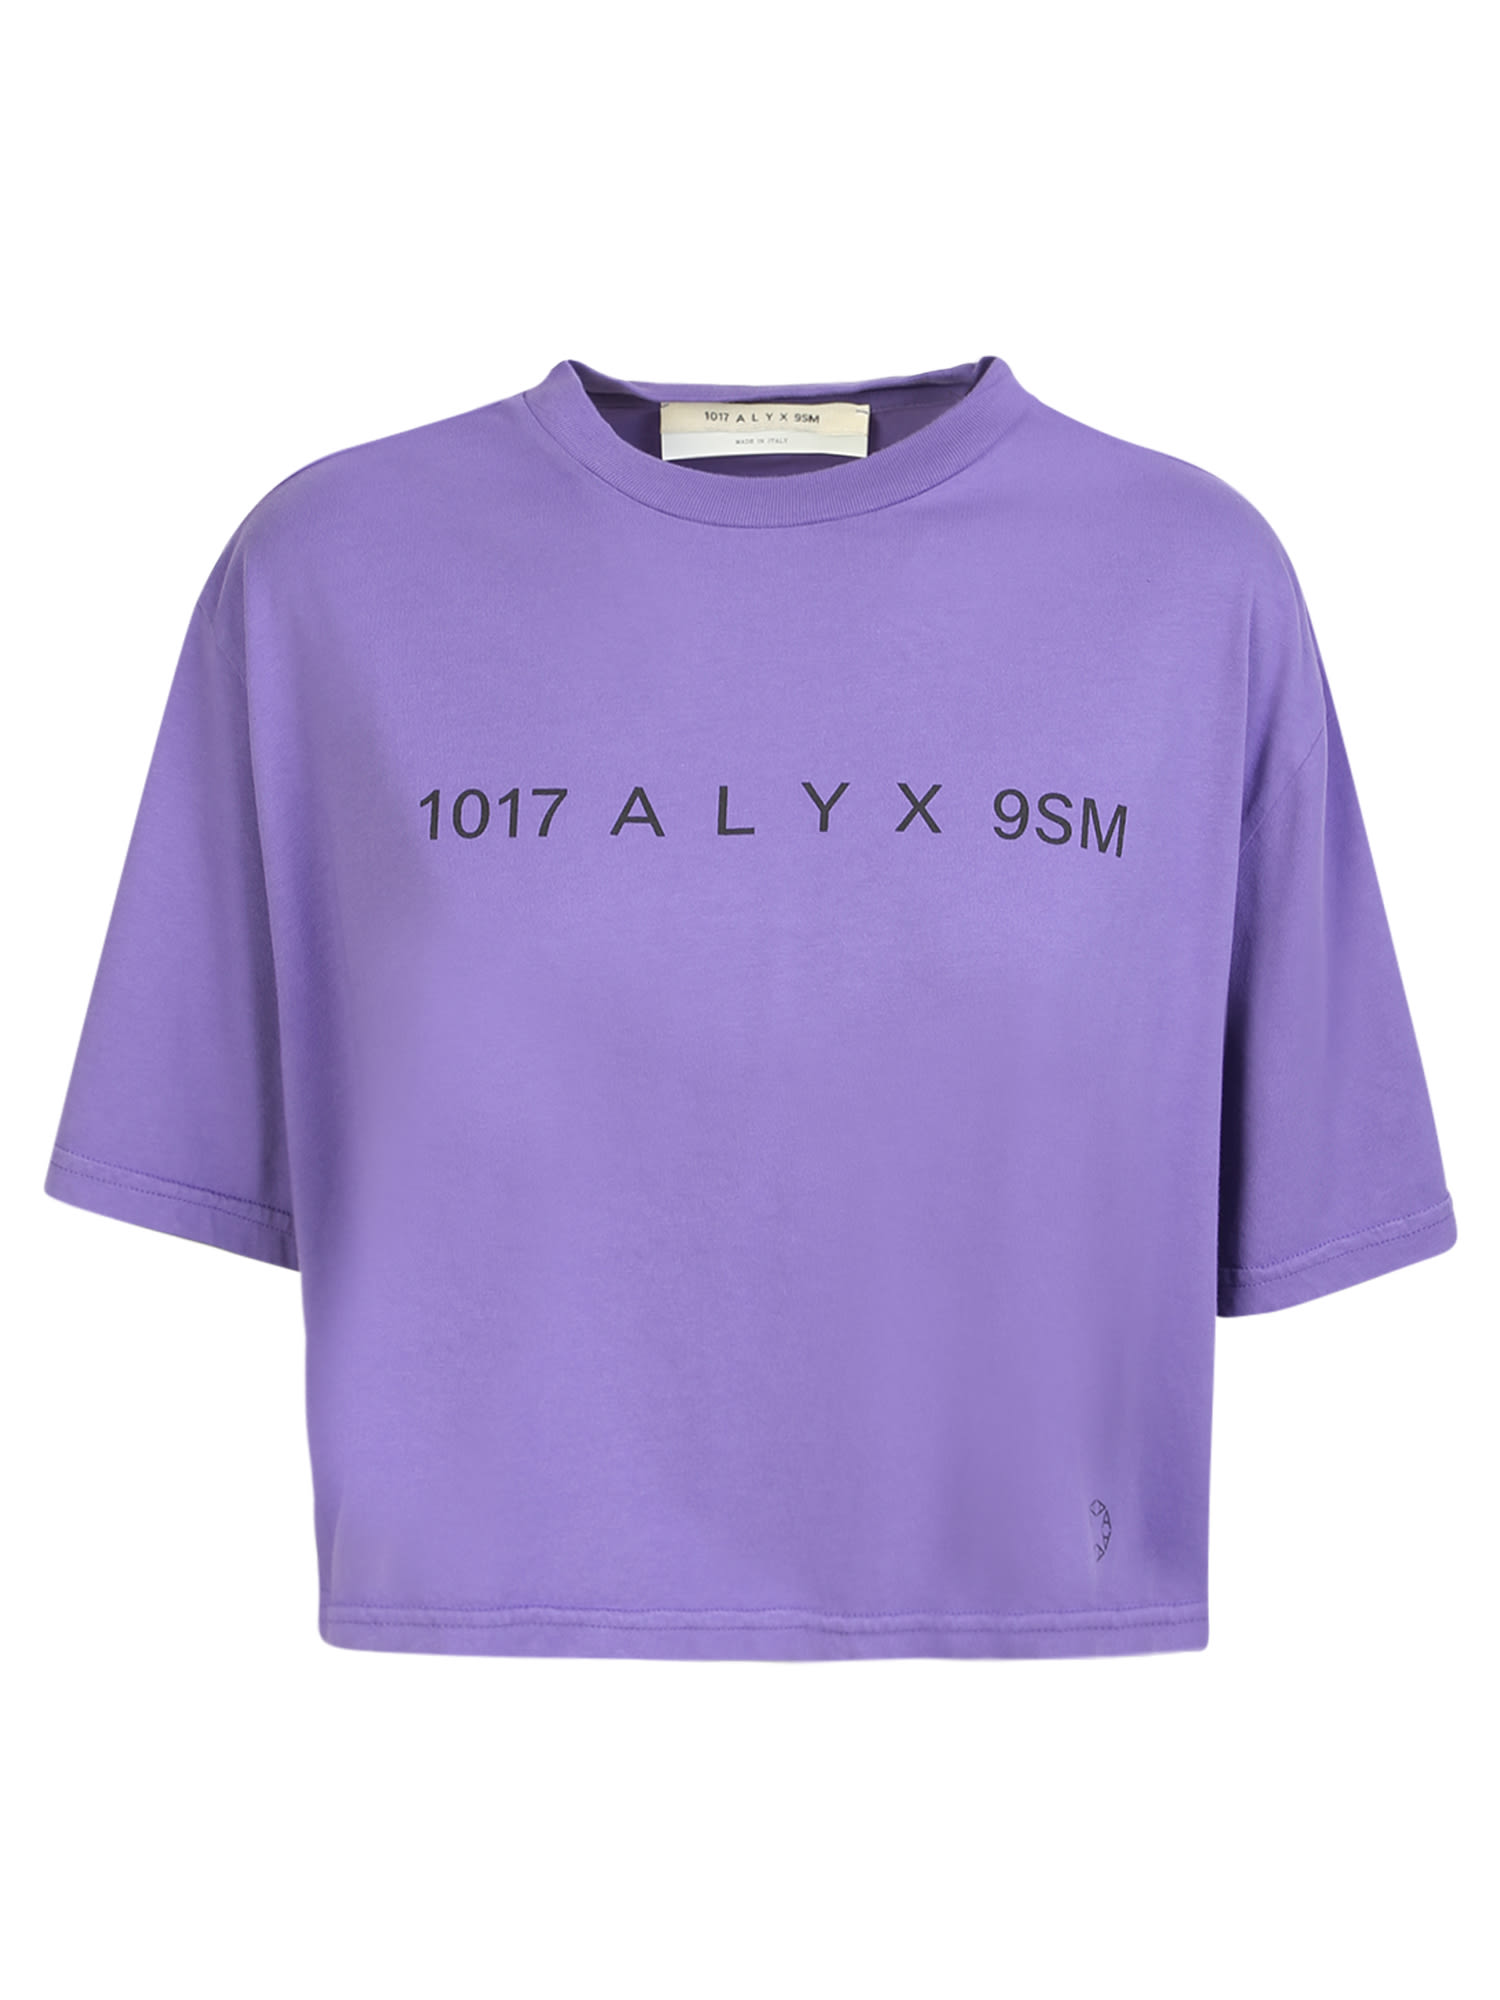 T-shirt By 1017 Alyx 9sm Characterized By A Crop Design And A Logo Print On The Chest